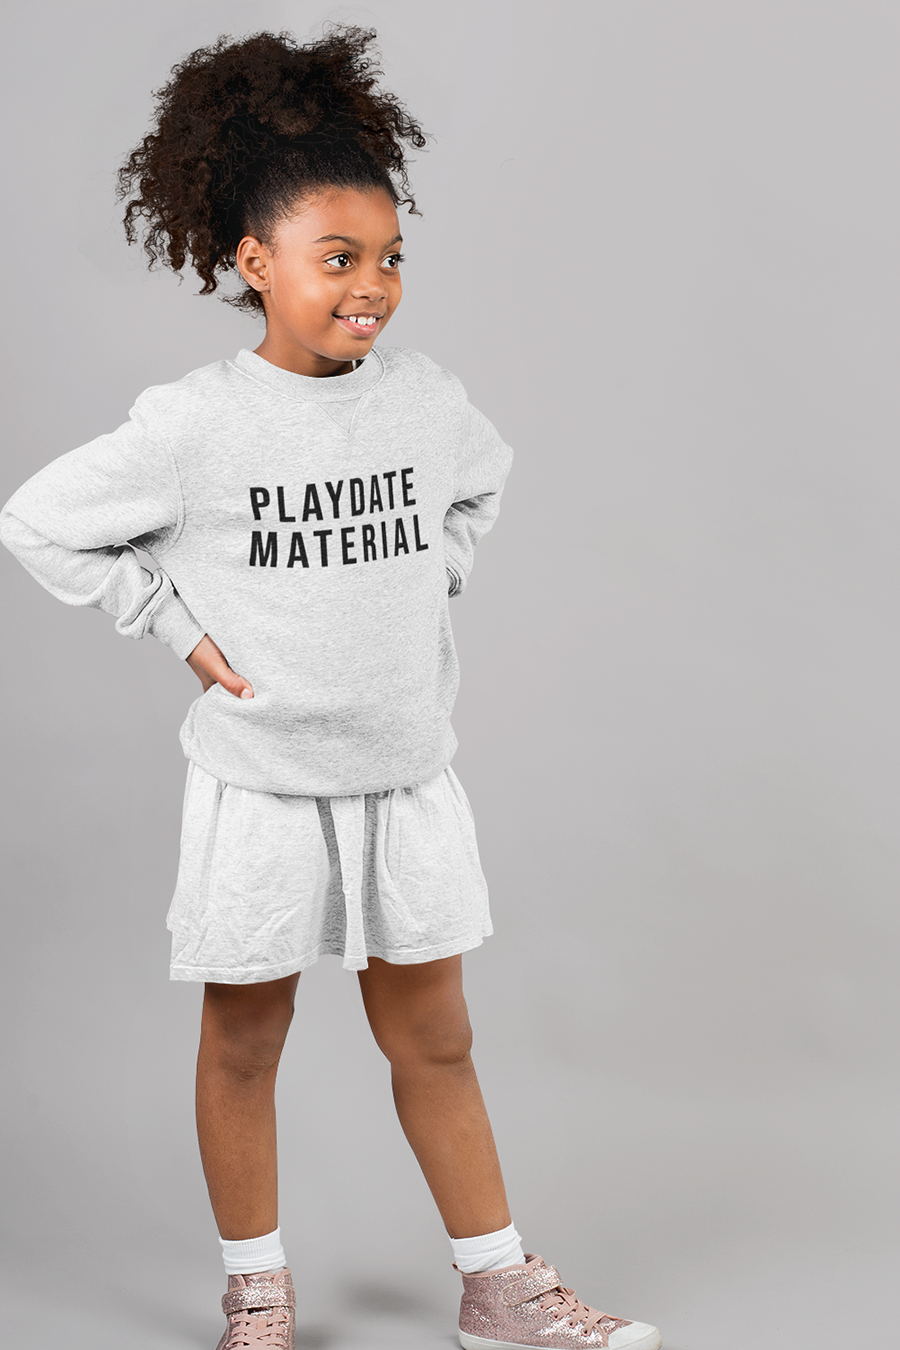 Playdate Material Kids Pullover | Heather Grey - Main Image Number 1 of 1